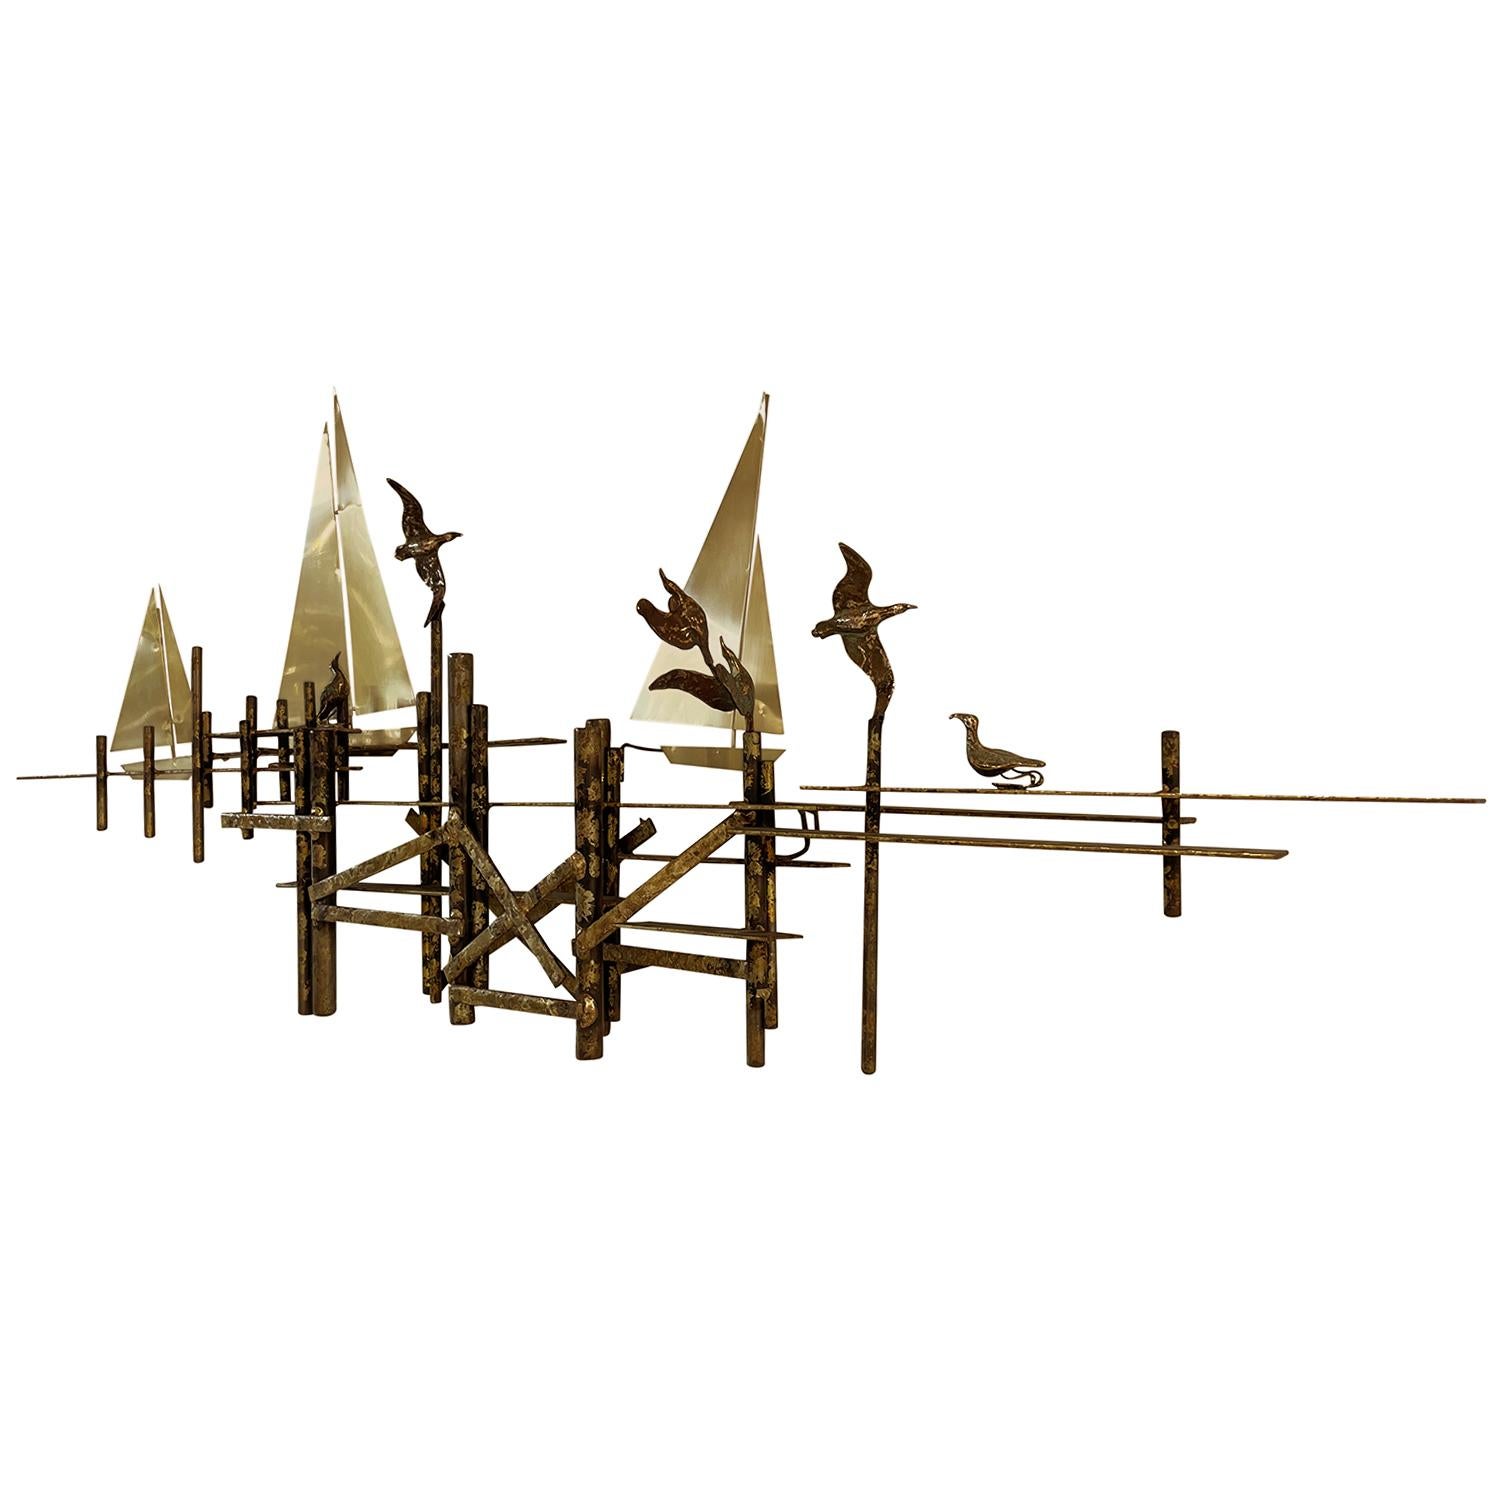 Mid-Century Modern 20th Century American Metal Birds and Sailboats Wall Sculpture by Curtis Jere For Sale